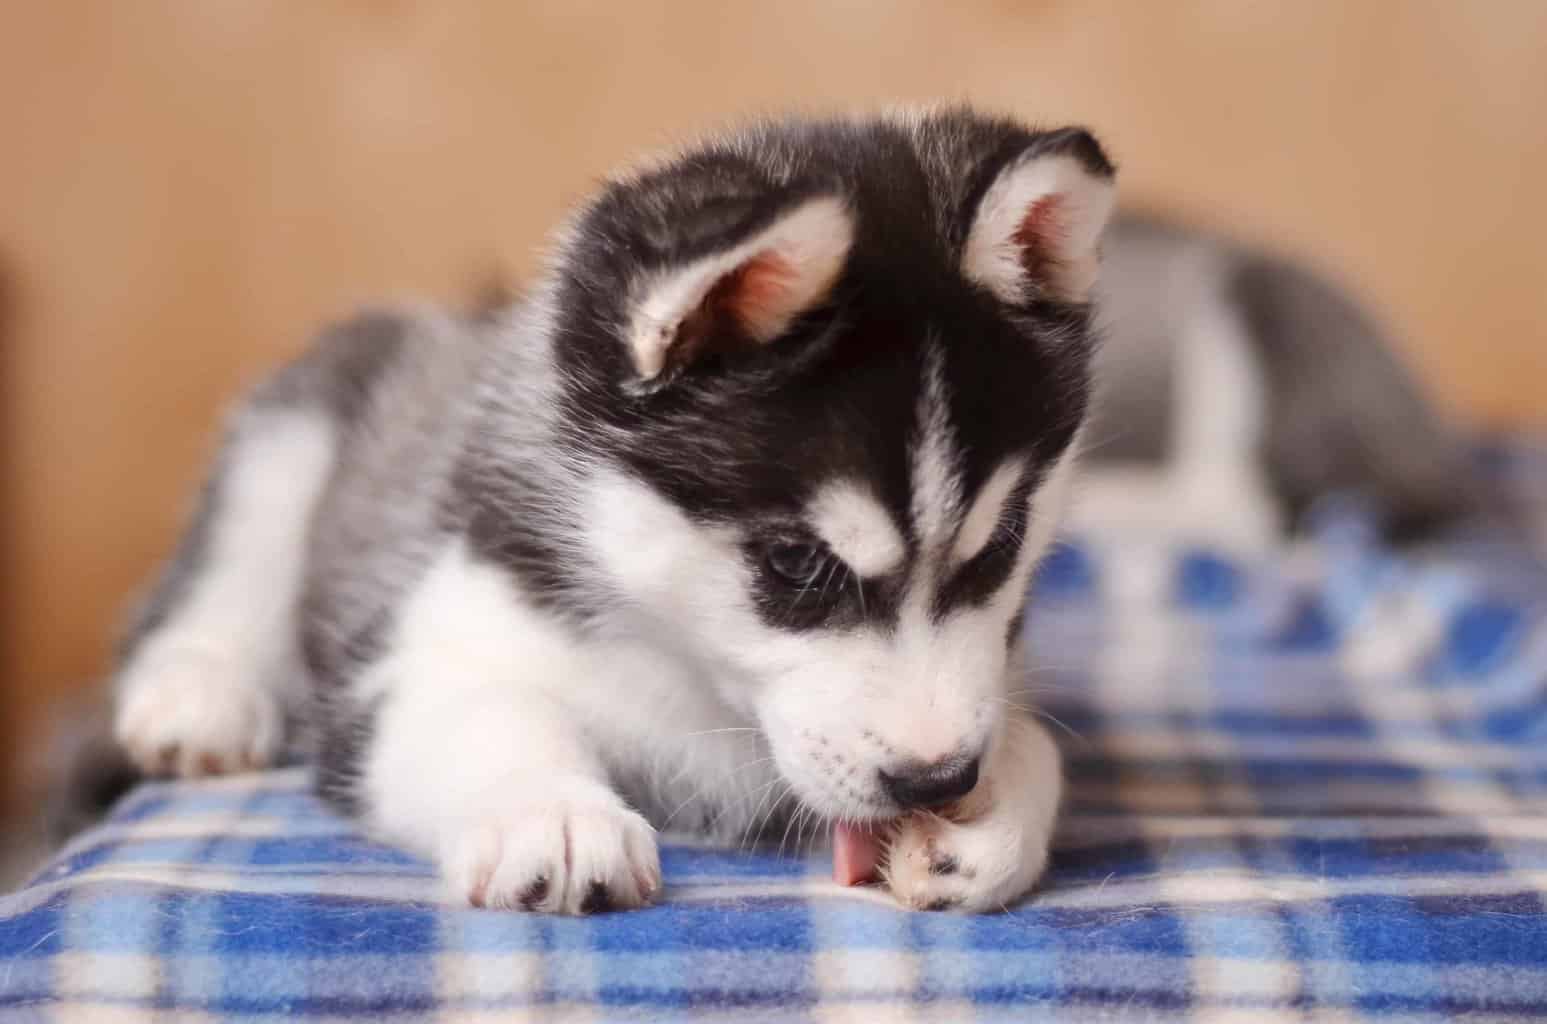 Siberian Husky puppy licks its paws. Dogs lick their paws when they're bored. They also lick paws due to injuries or reactions to allergens, injuries, or insect bites or stings. 